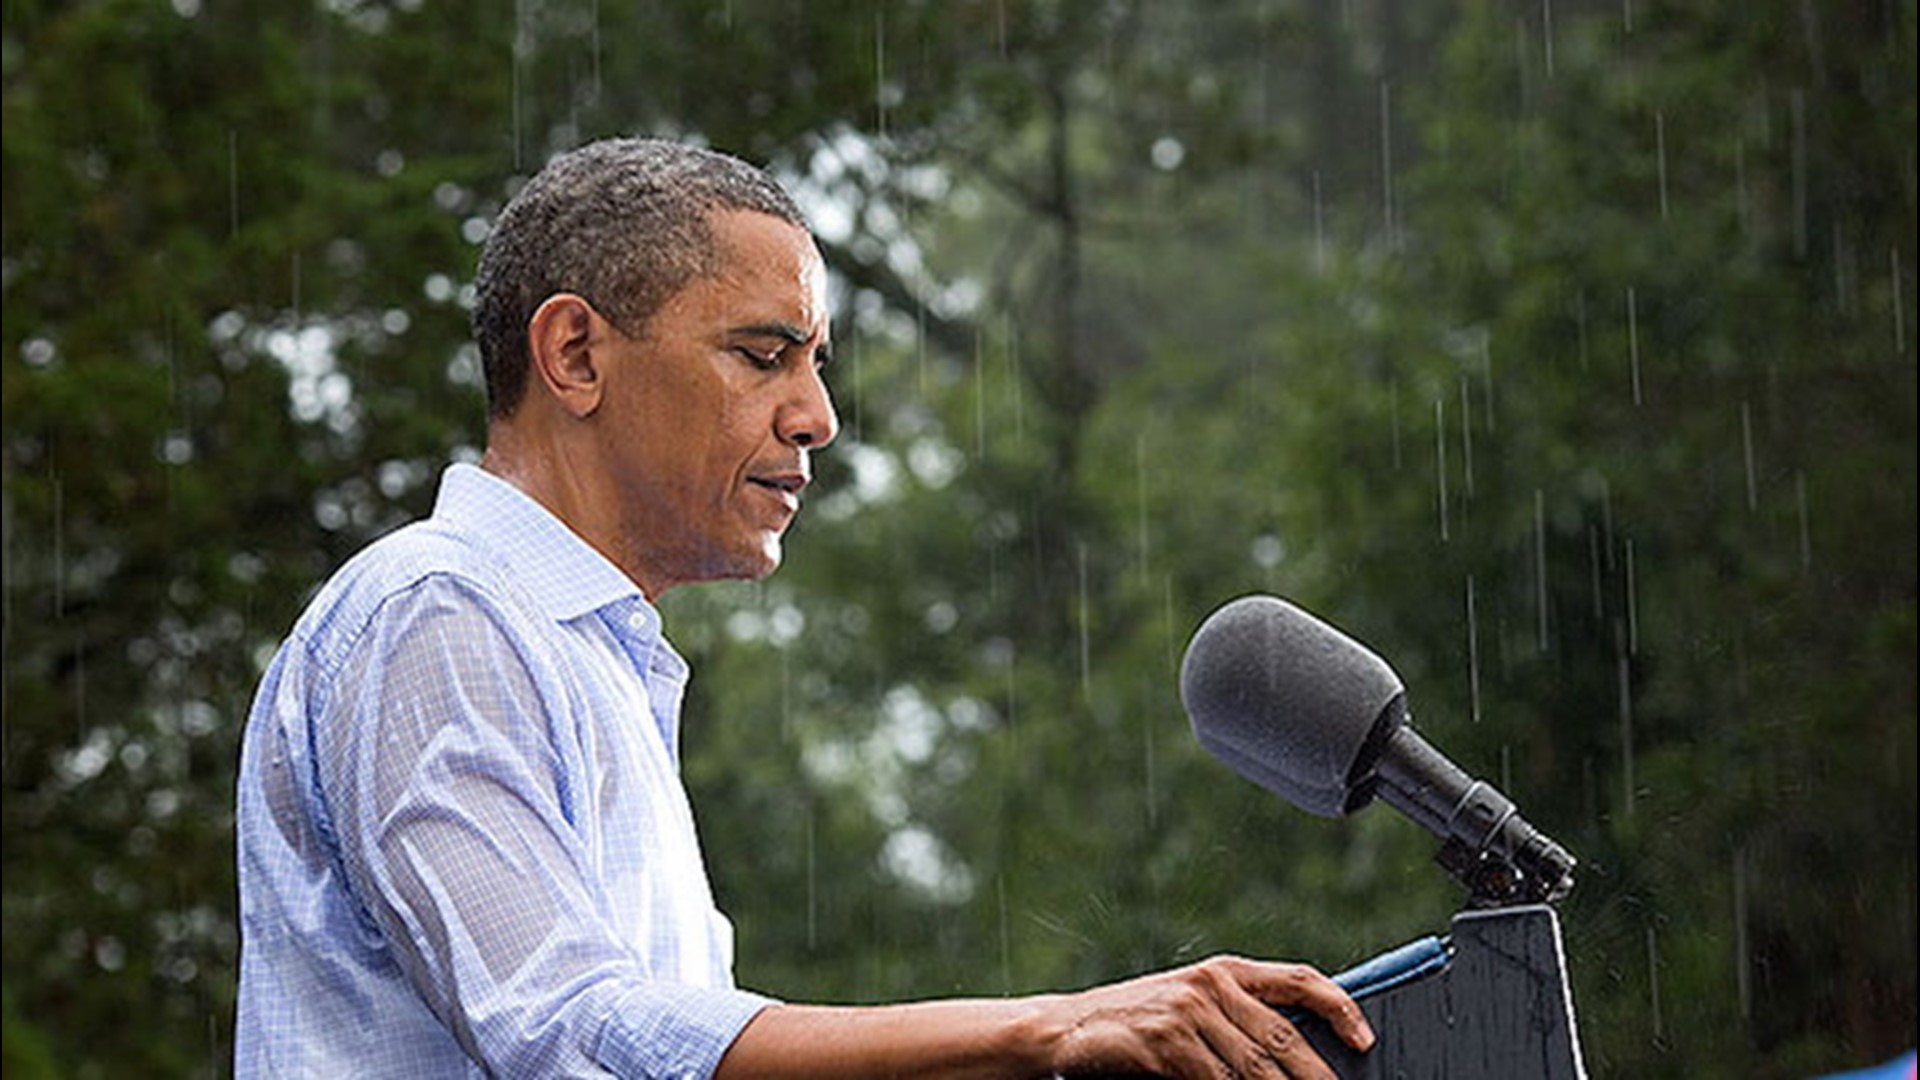 From heavy snow to soaking rain, weather isn't always kind to presidents. Here's a look back at some of those moments.